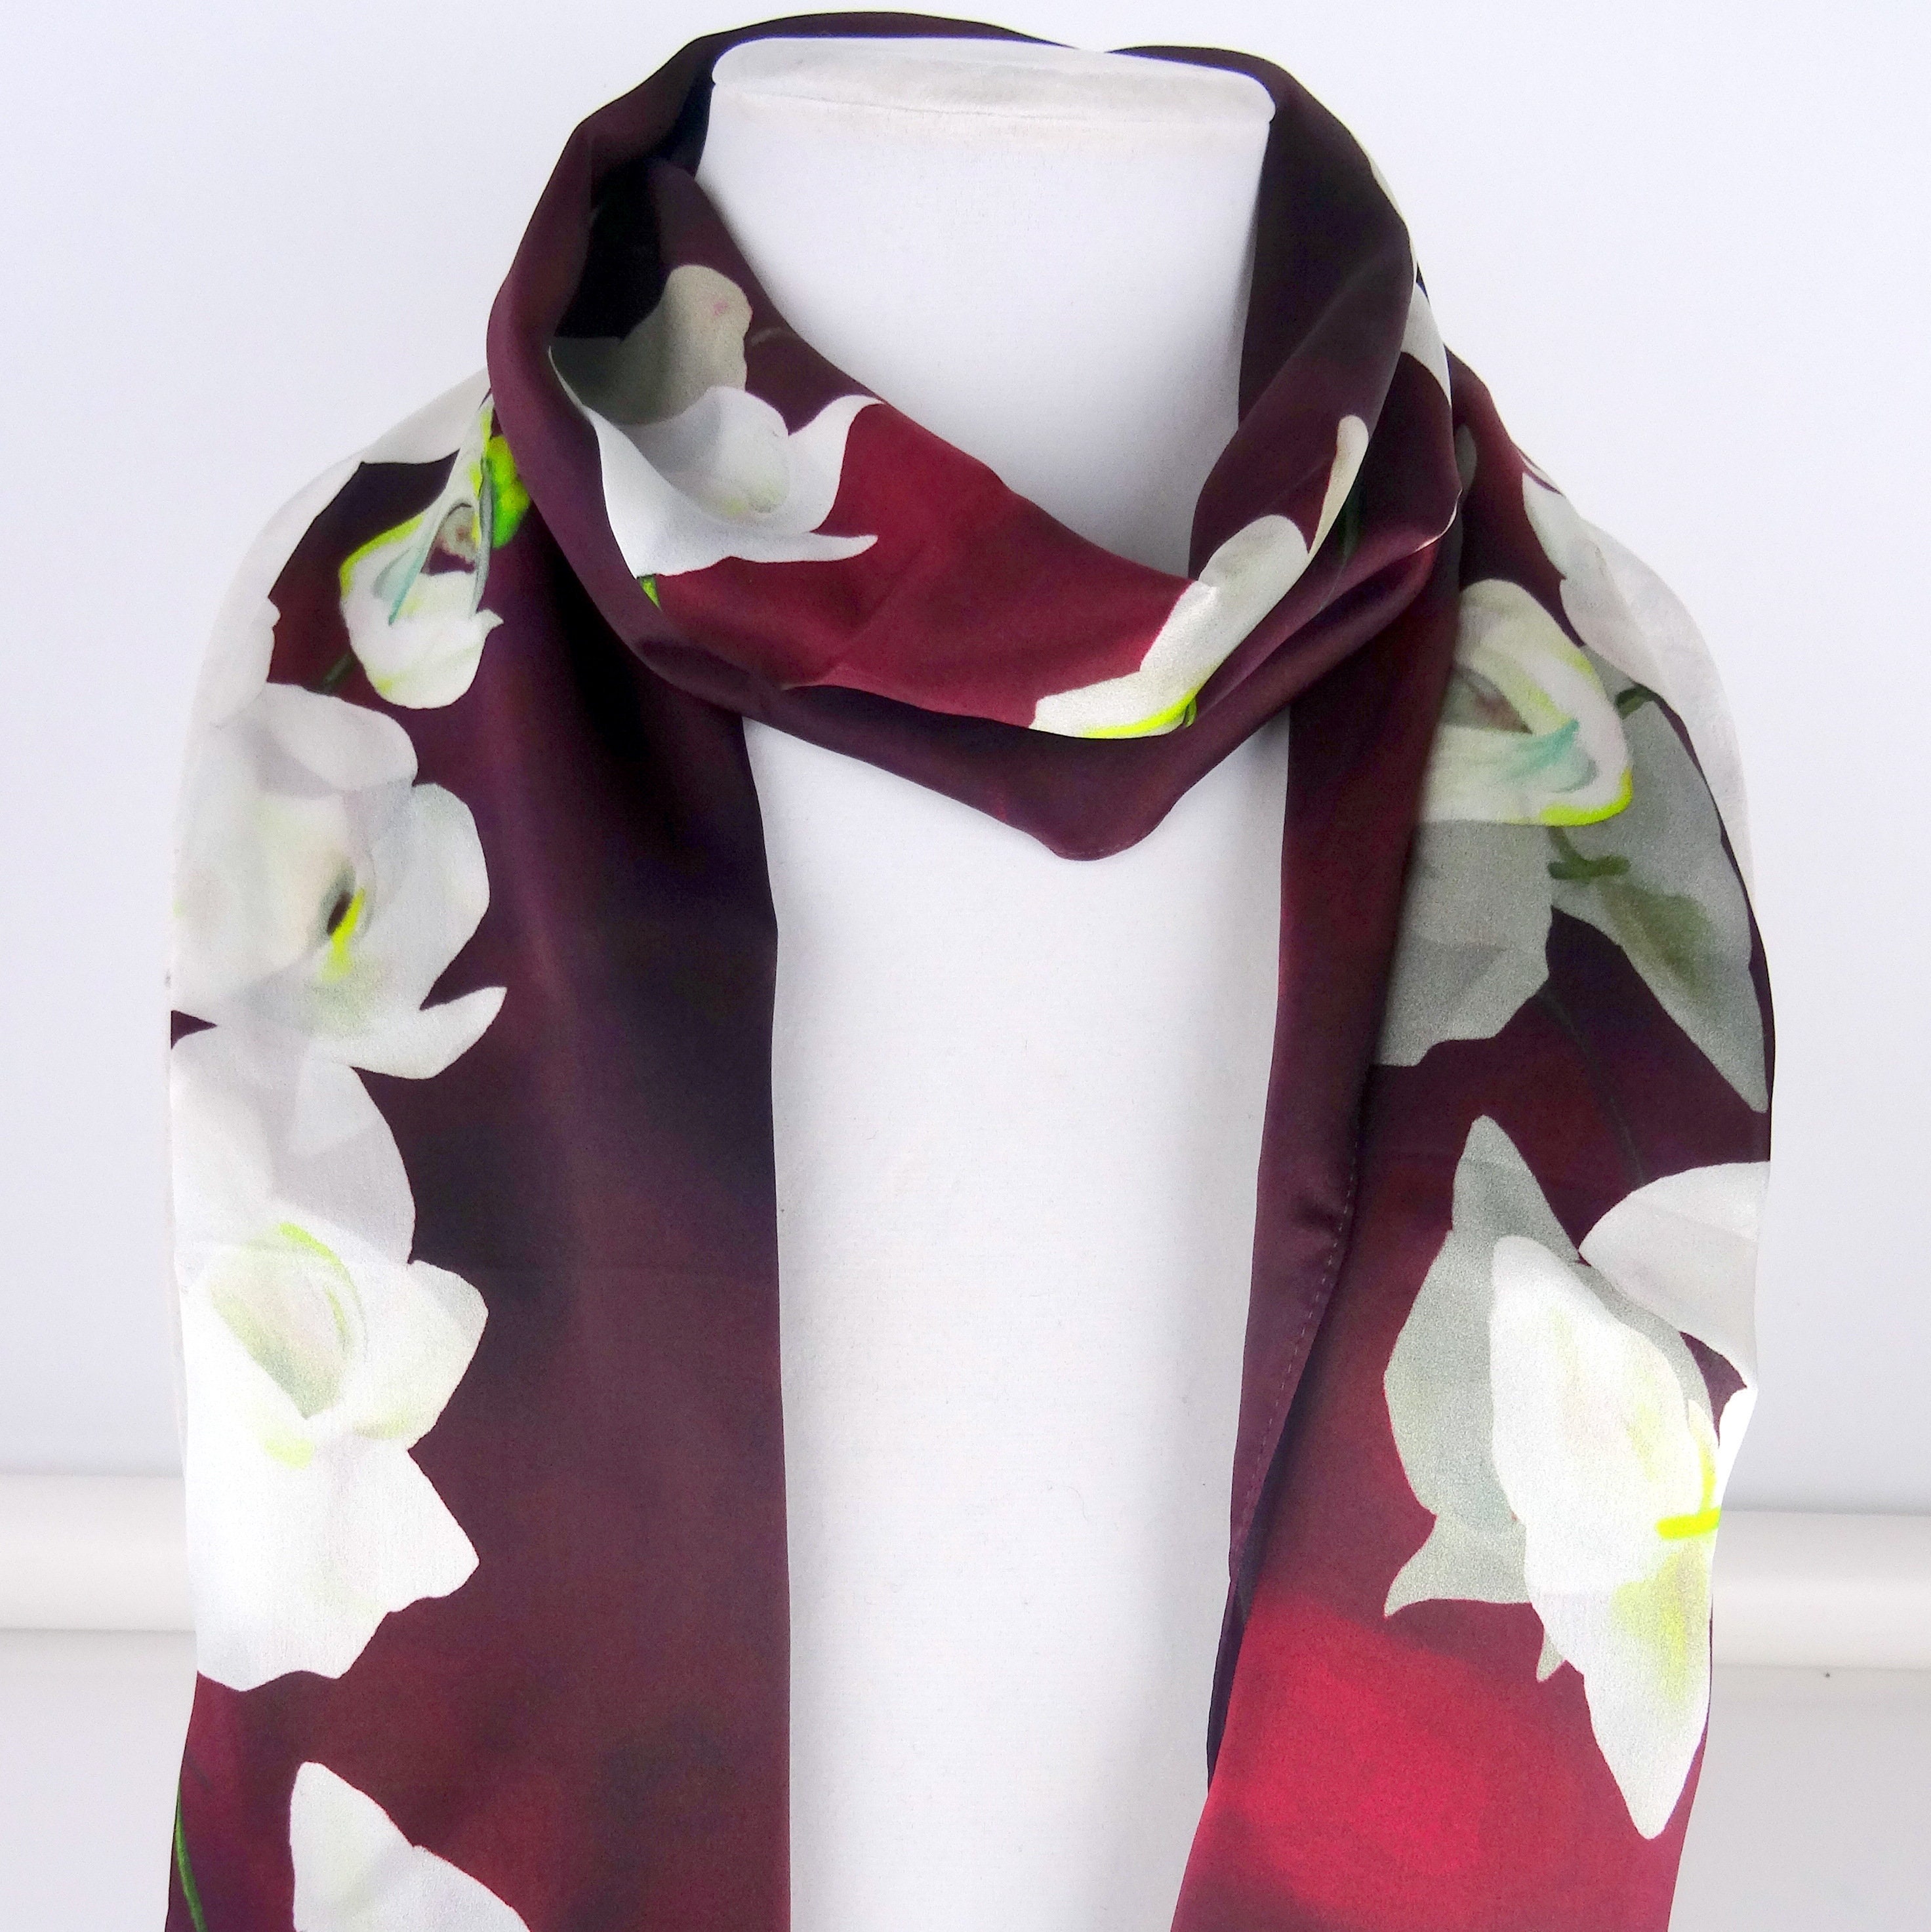  DSJSUG Mixed Silk Square Scarves,Women's Silk Scarf-Wine red_70  * 70cm,Women Soft Small Square Scarves (Wine Red 70 * 70cm) : Home & Kitchen